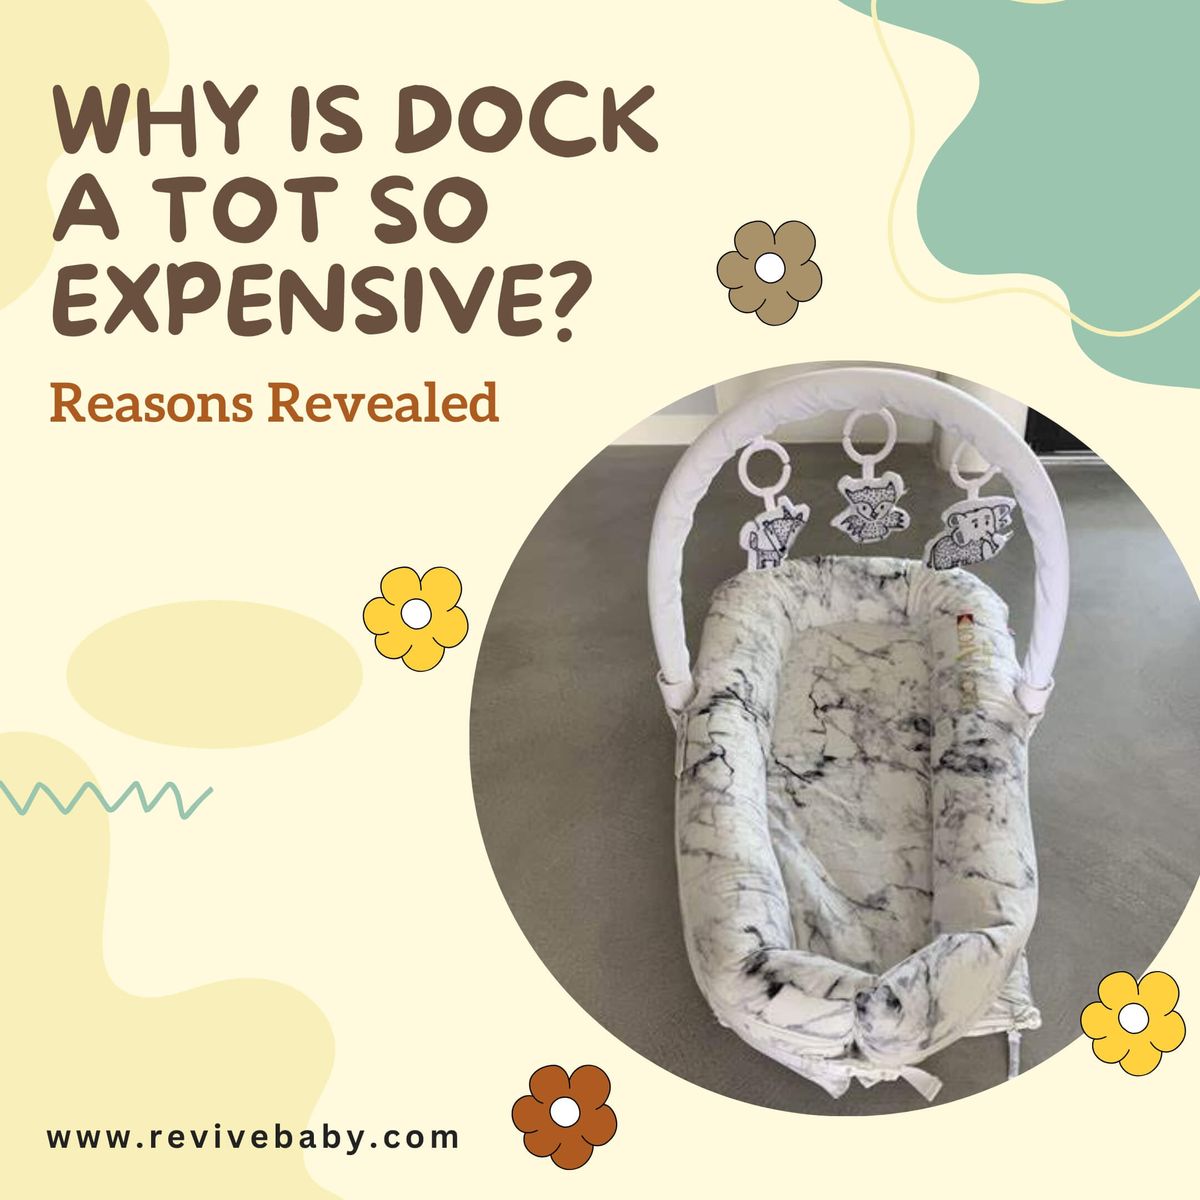 Why Is Dock A Tot So Expensive - Reasons Revealed